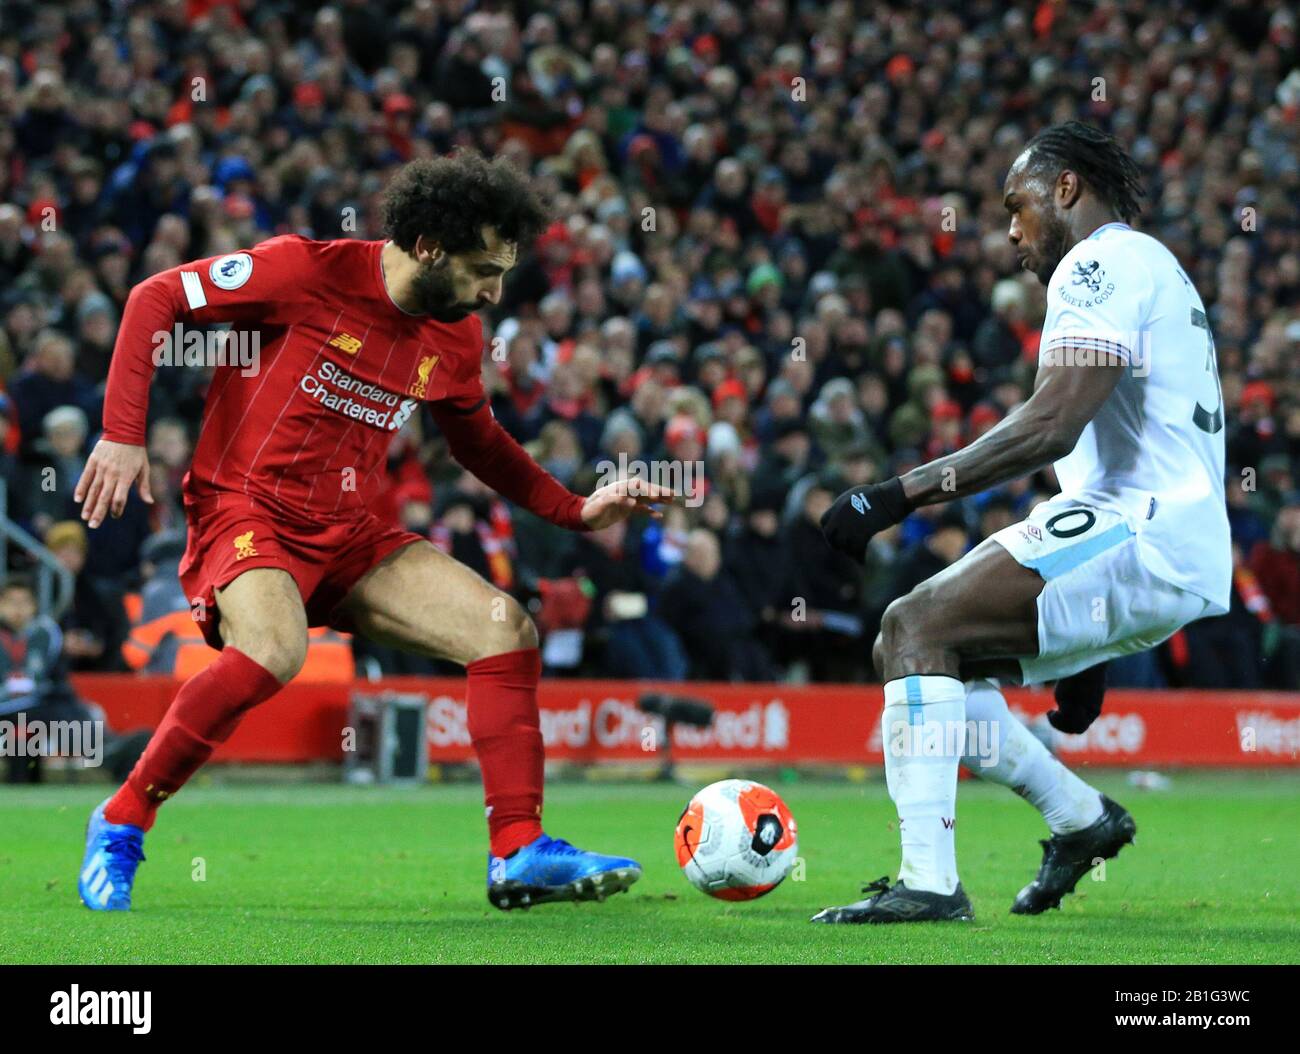 Anfield, Liverpool, Merseyside, UK. 24th Feb, 2020. English Premier League Football, Liverpool versus West Ham United; Mohammed Salah of Liverpool takes on Michail Antonio of West Ham United - Strictly Editorial Use Only. No use with unauthorized audio, video, data, fixture lists, club/league logos or 'live' services. Online in-match use limited to 120 images, no video emulation. No use in betting, games or single club/league/player publications Credit: Action Plus Sports/Alamy Live News Stock Photo